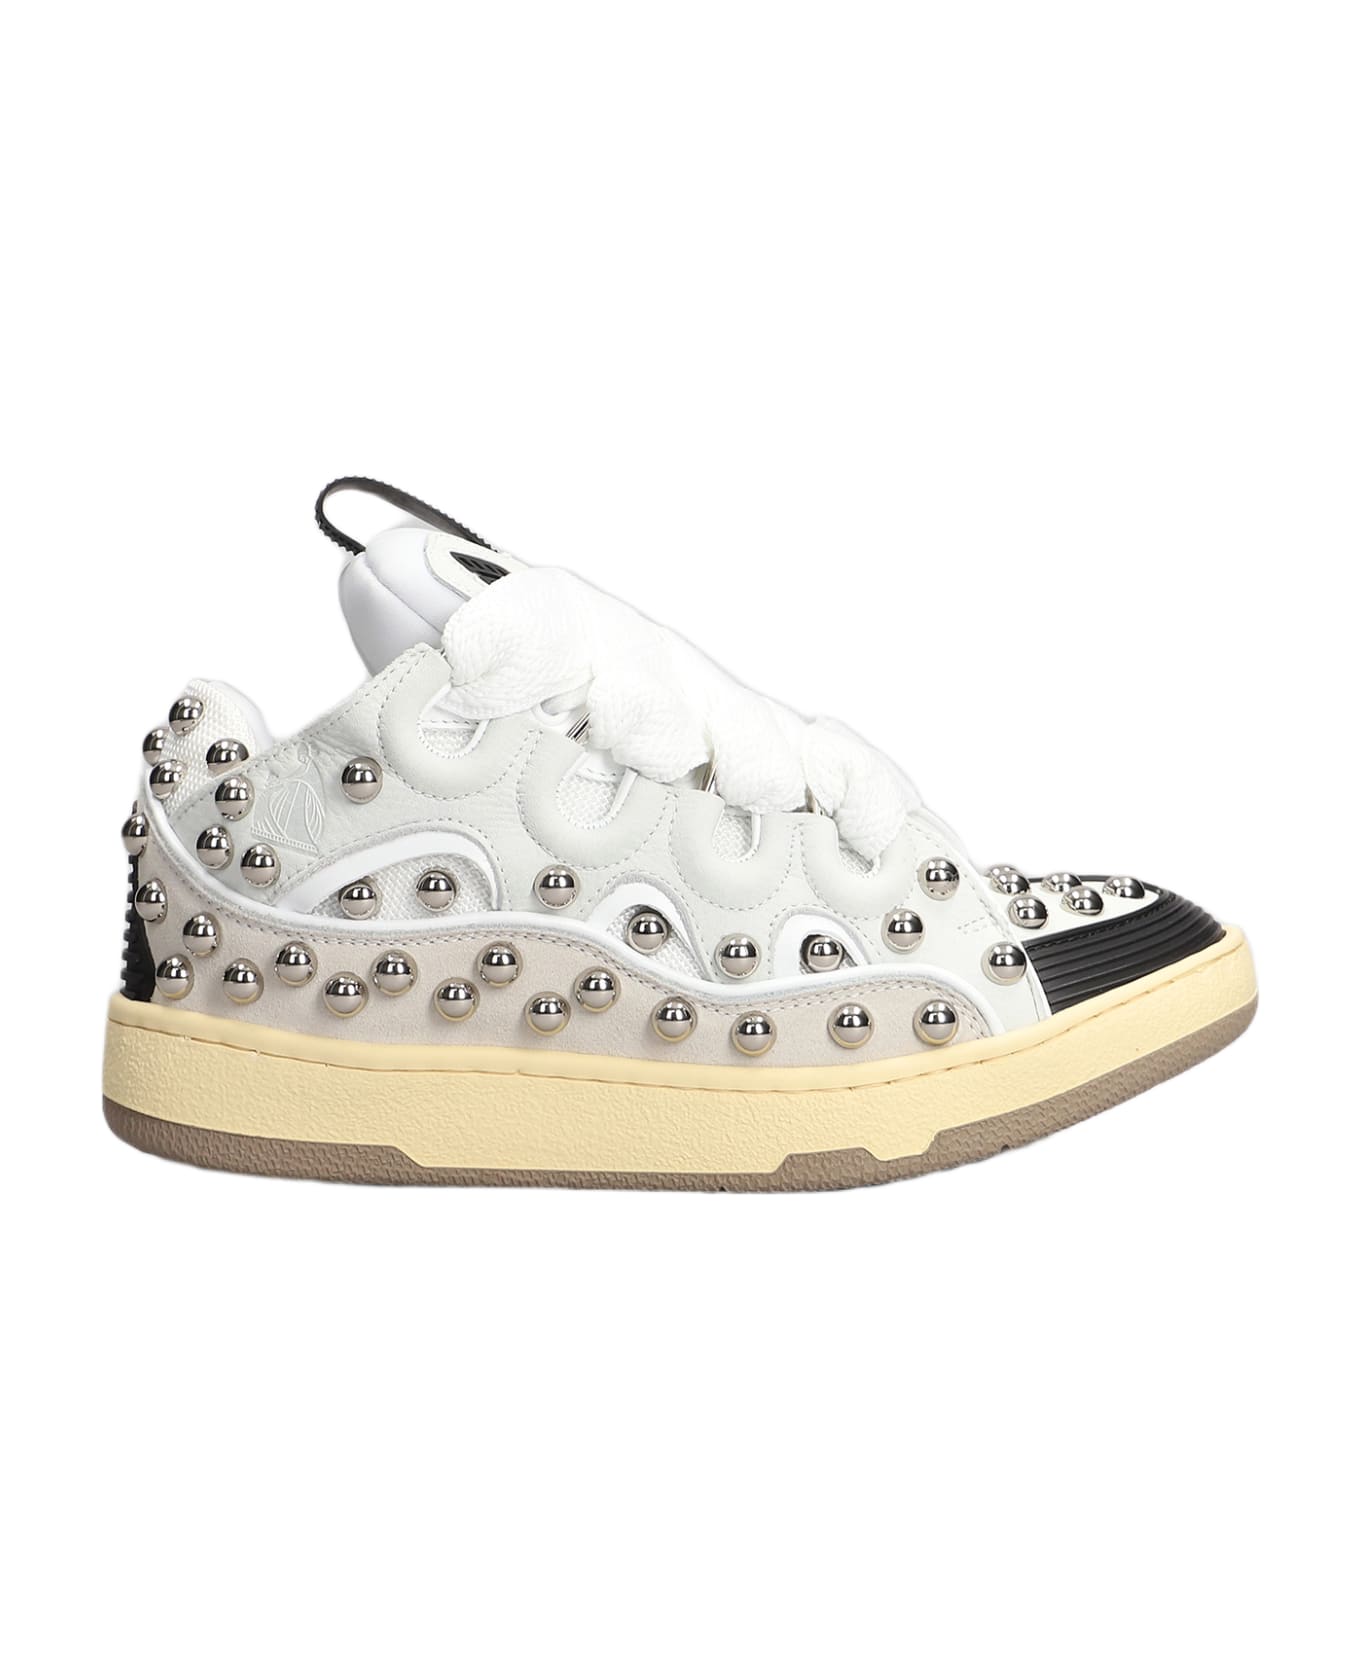 Lanvin Curb Sneakers In White Leather - White スニーカー